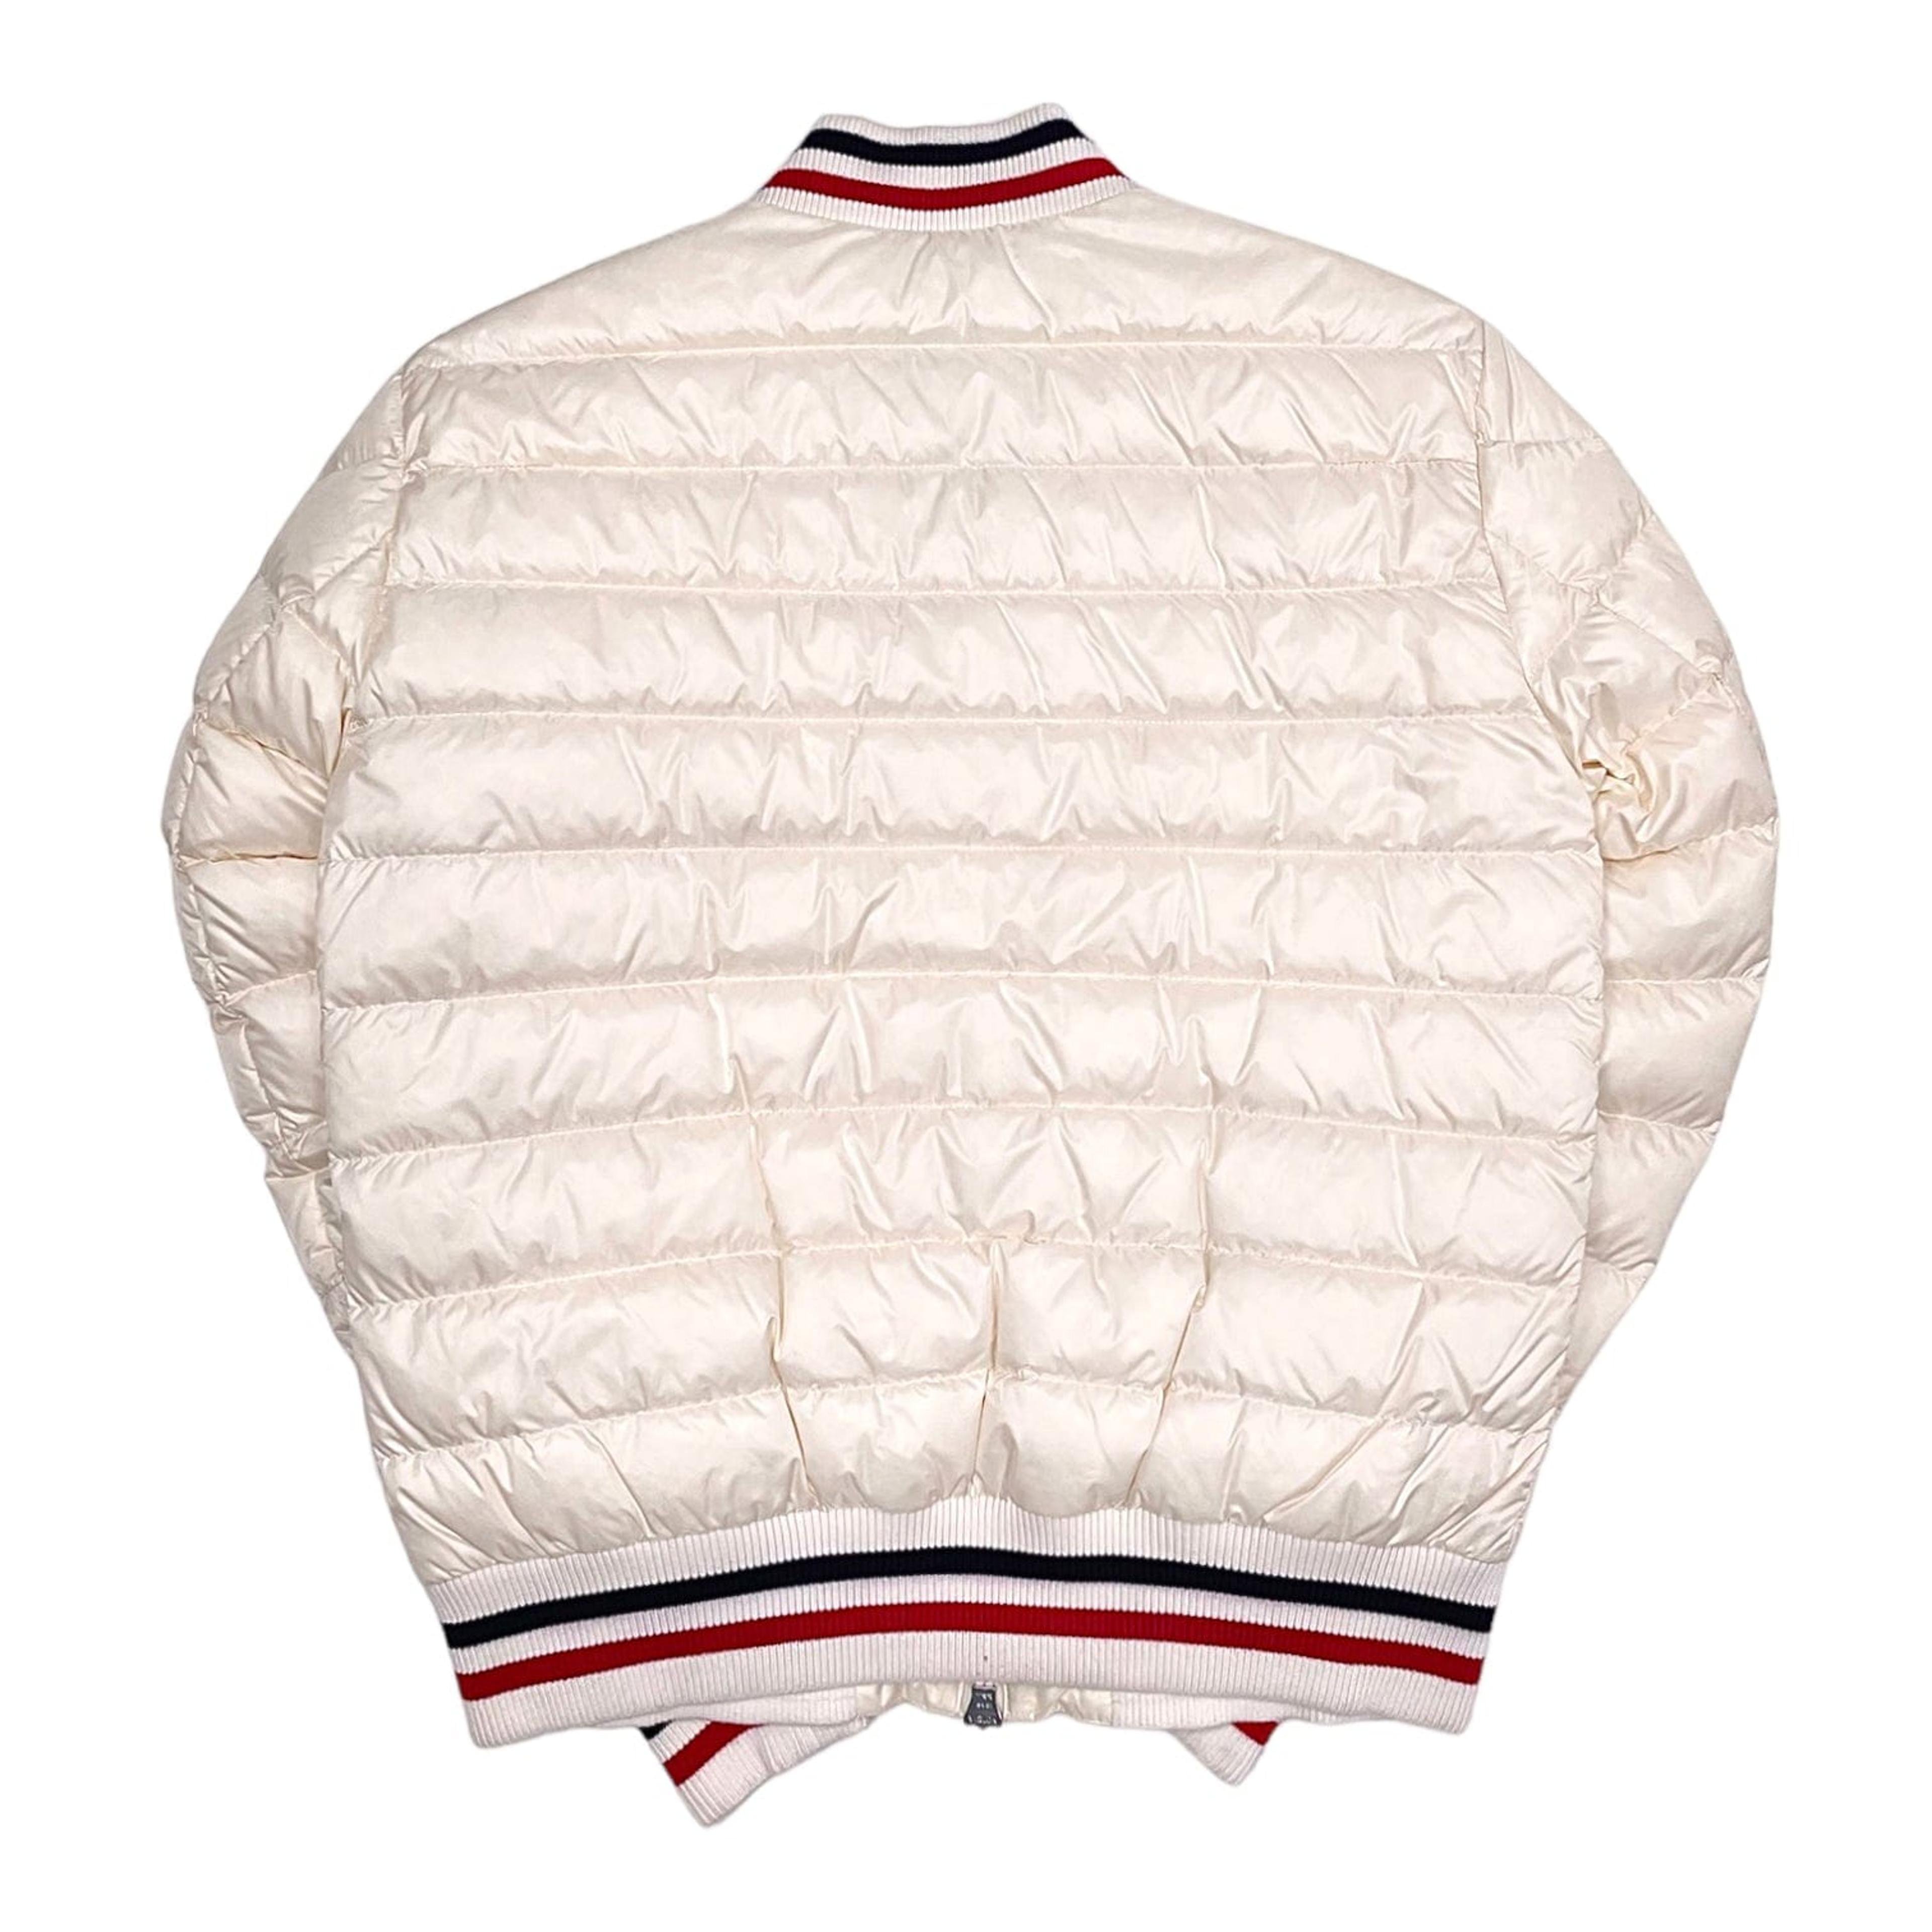 Alternate View 1 of Moncler Deltour Quilted Down Jacket White Pre-Owned